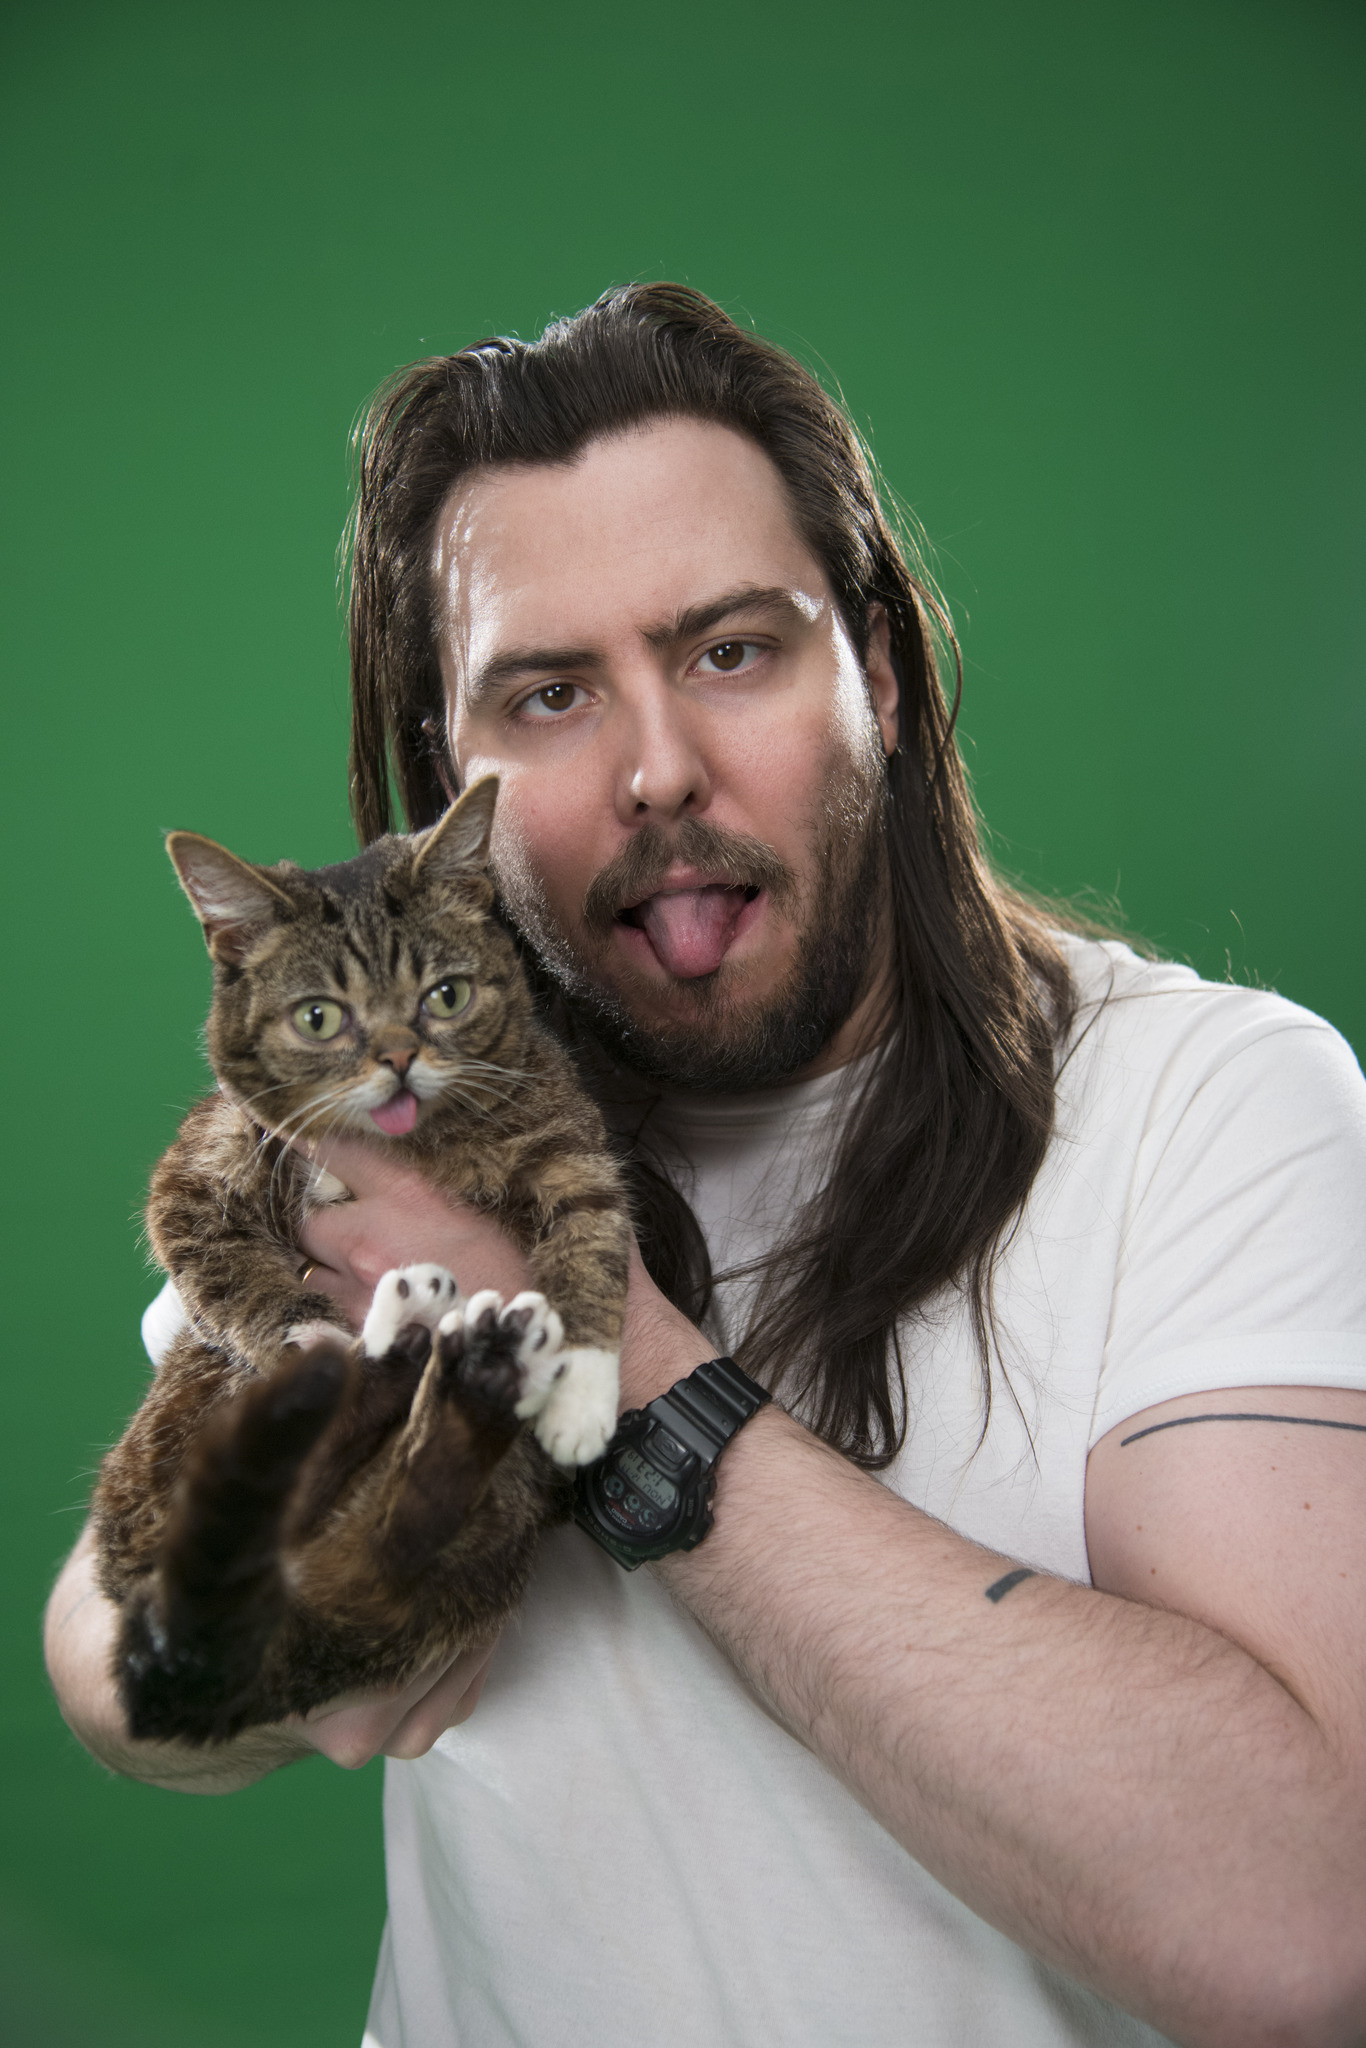 Andrew W.K. and Lil Bub